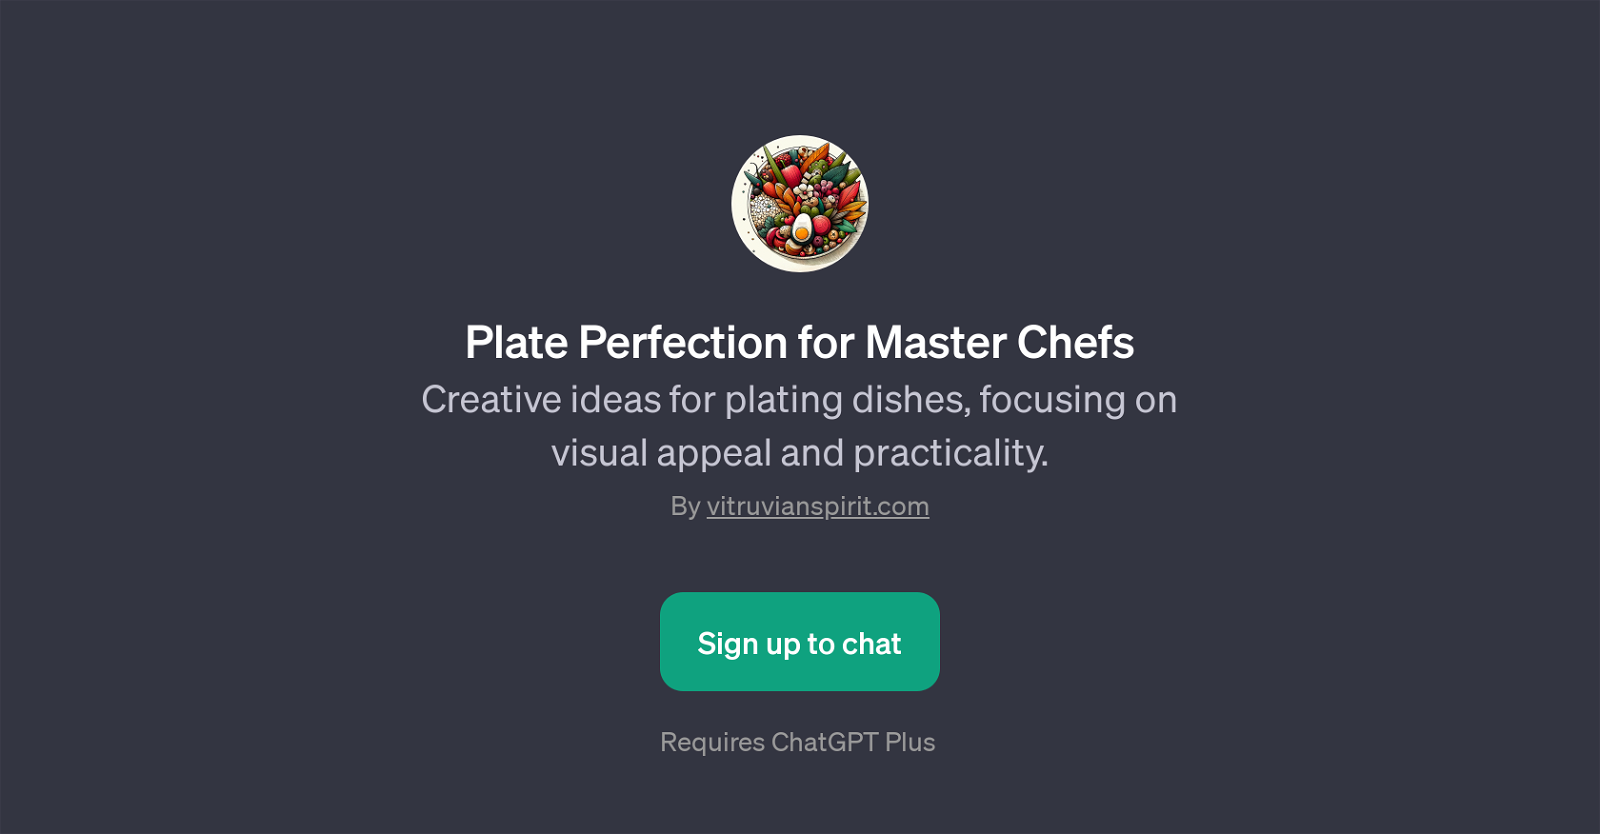 Plate Perfection for Master Chefs website